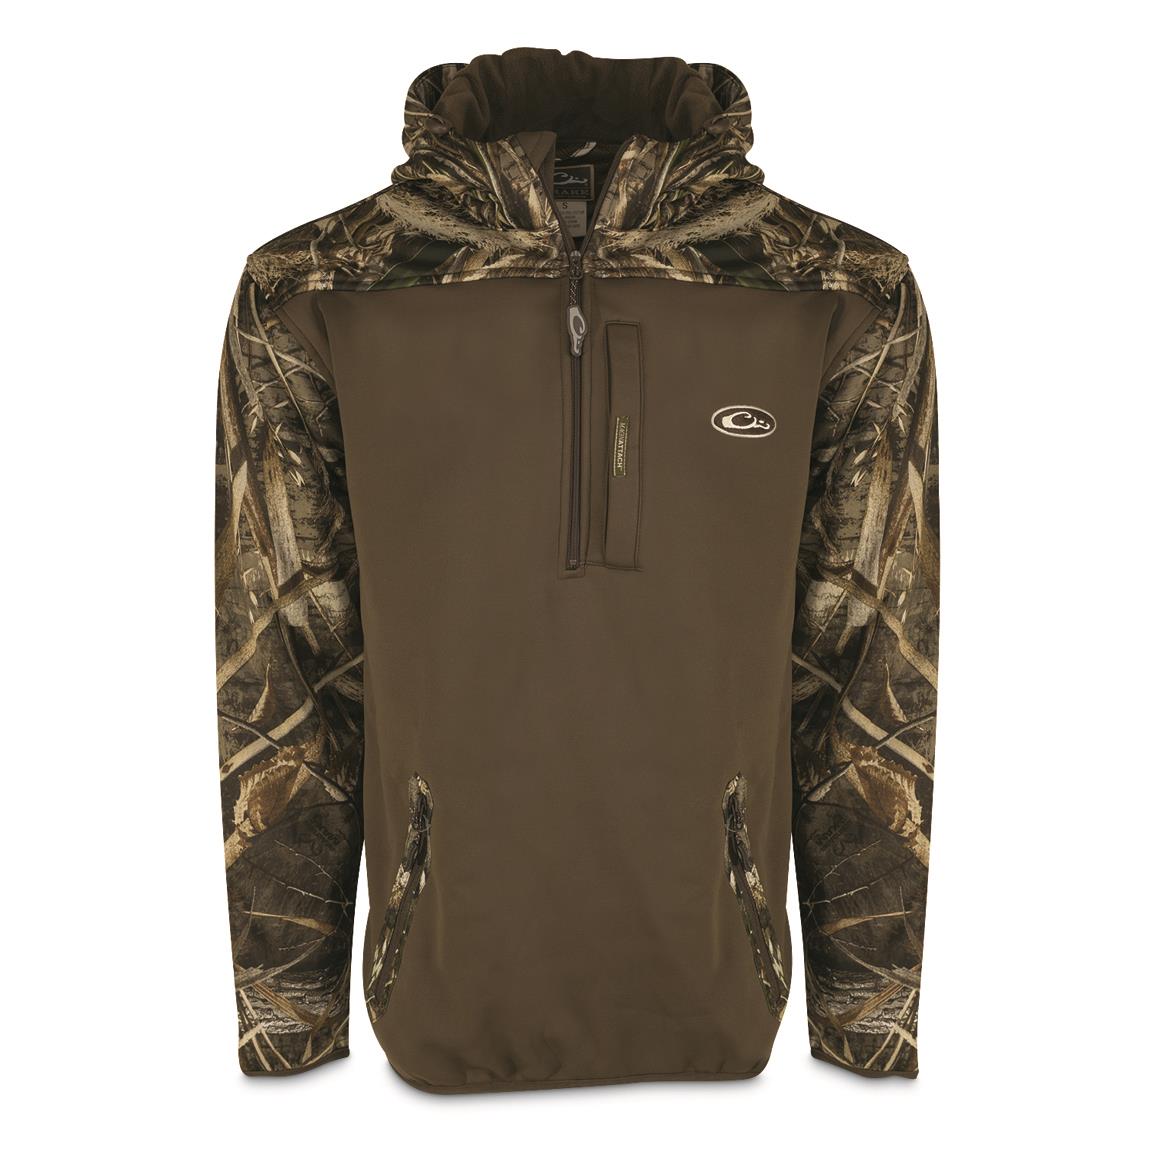 Plenty of pockets for small accessories, Realtree MAX-5®